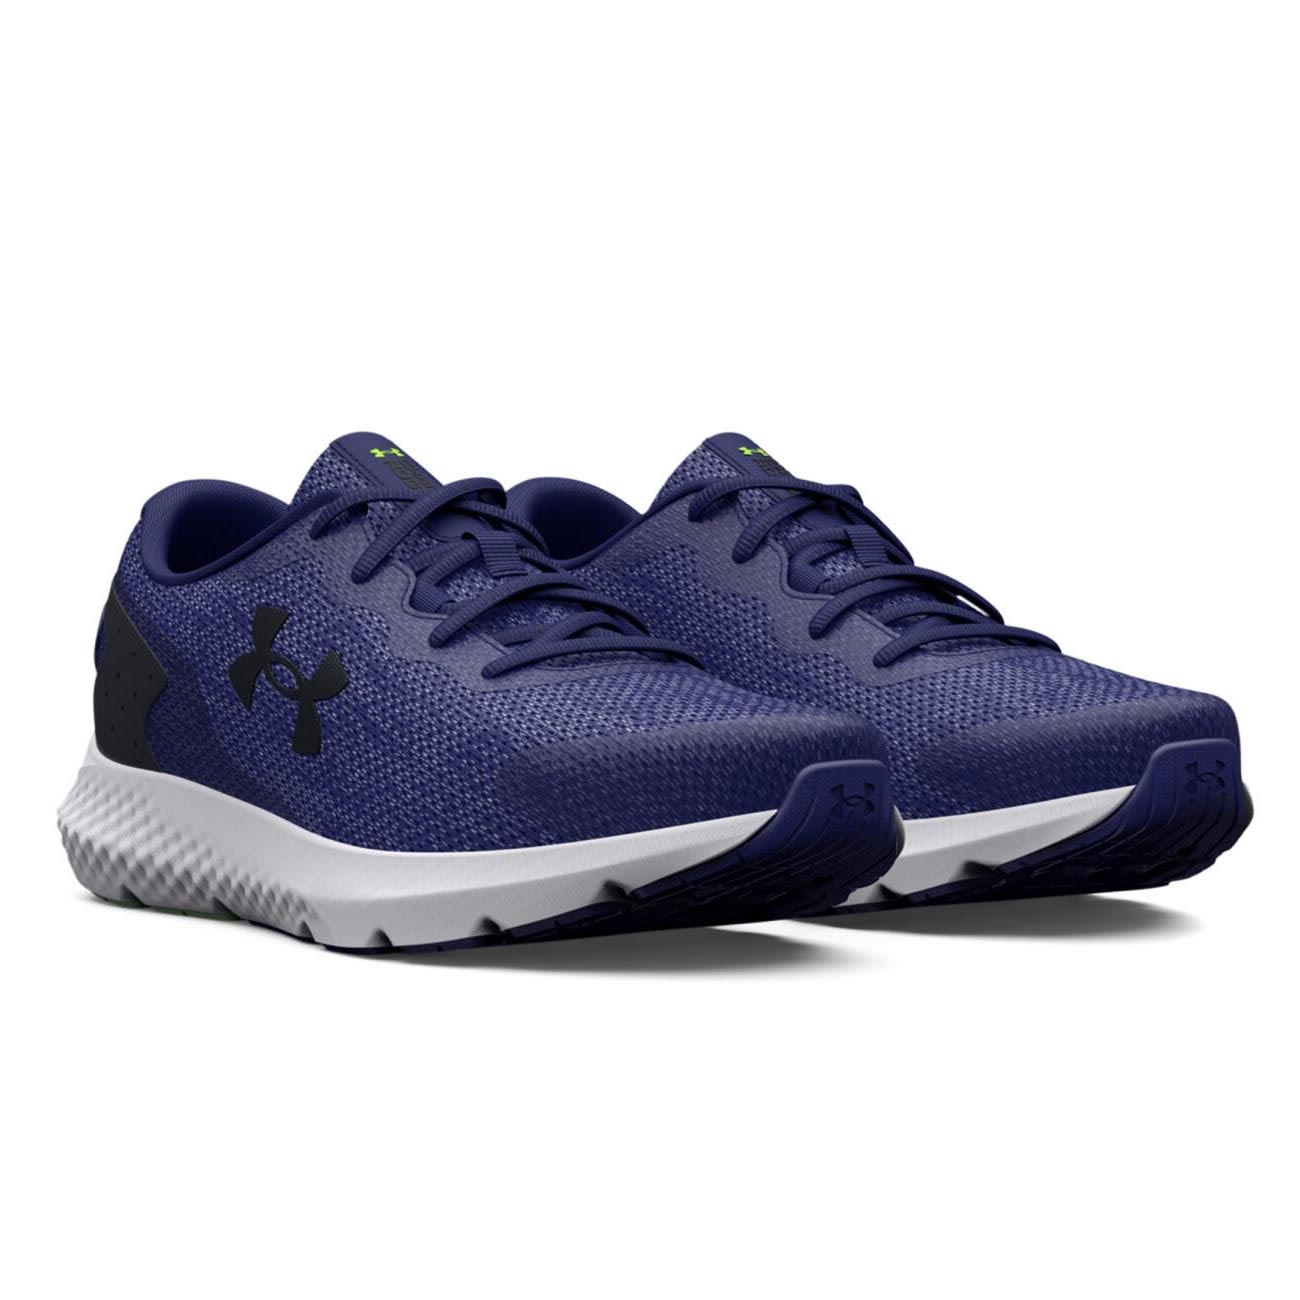 UNDER ARMOUR CHARGED ROGUE 3 KNIT MENS RUNNING SHOES